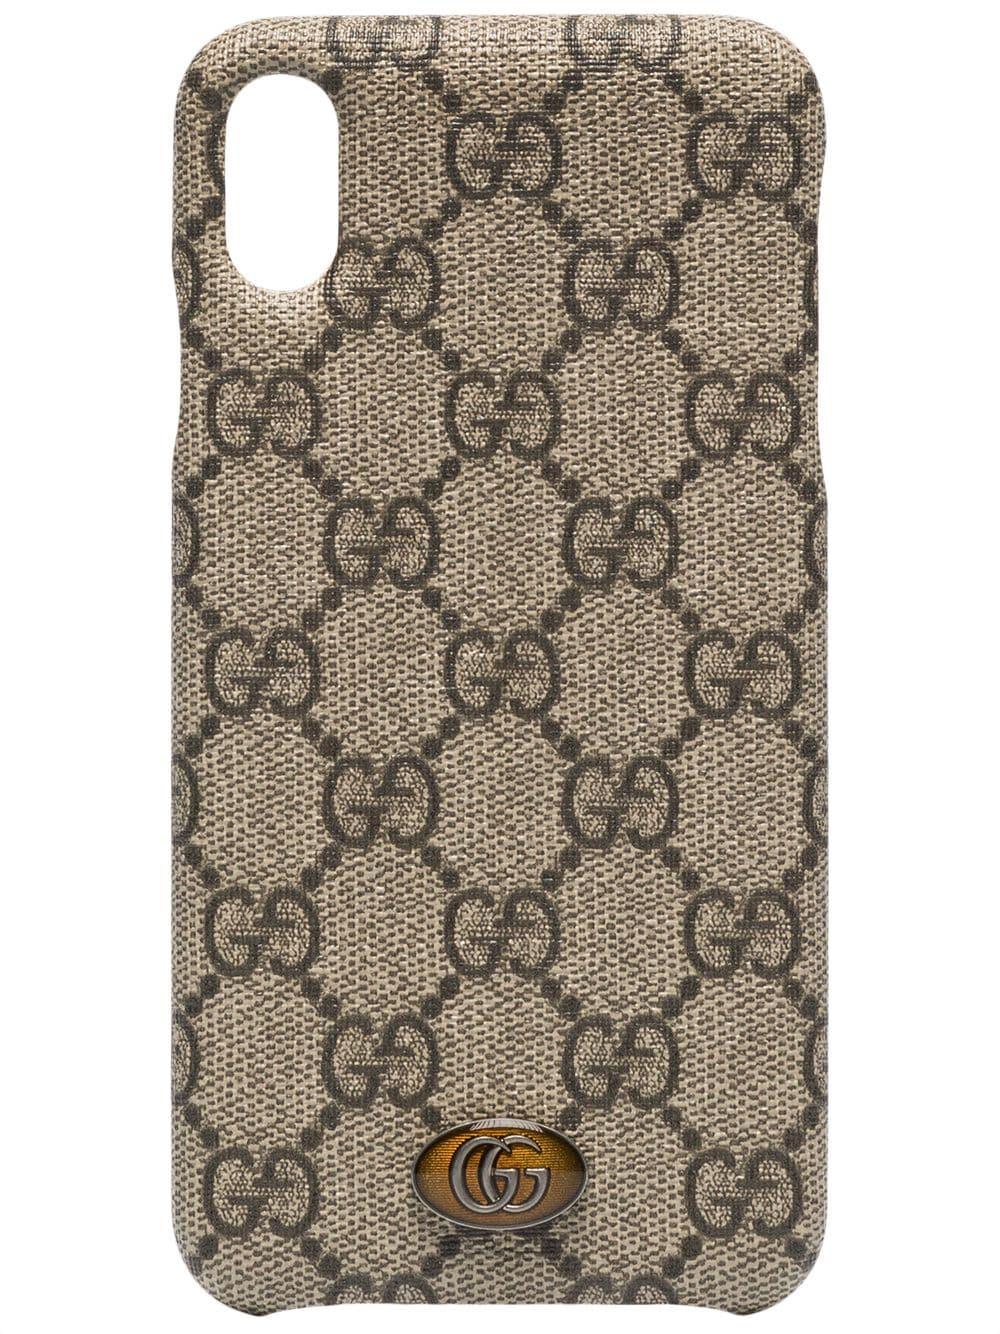 Gucci Ophidia Iphone 8 Plus Case in Brown | Lyst